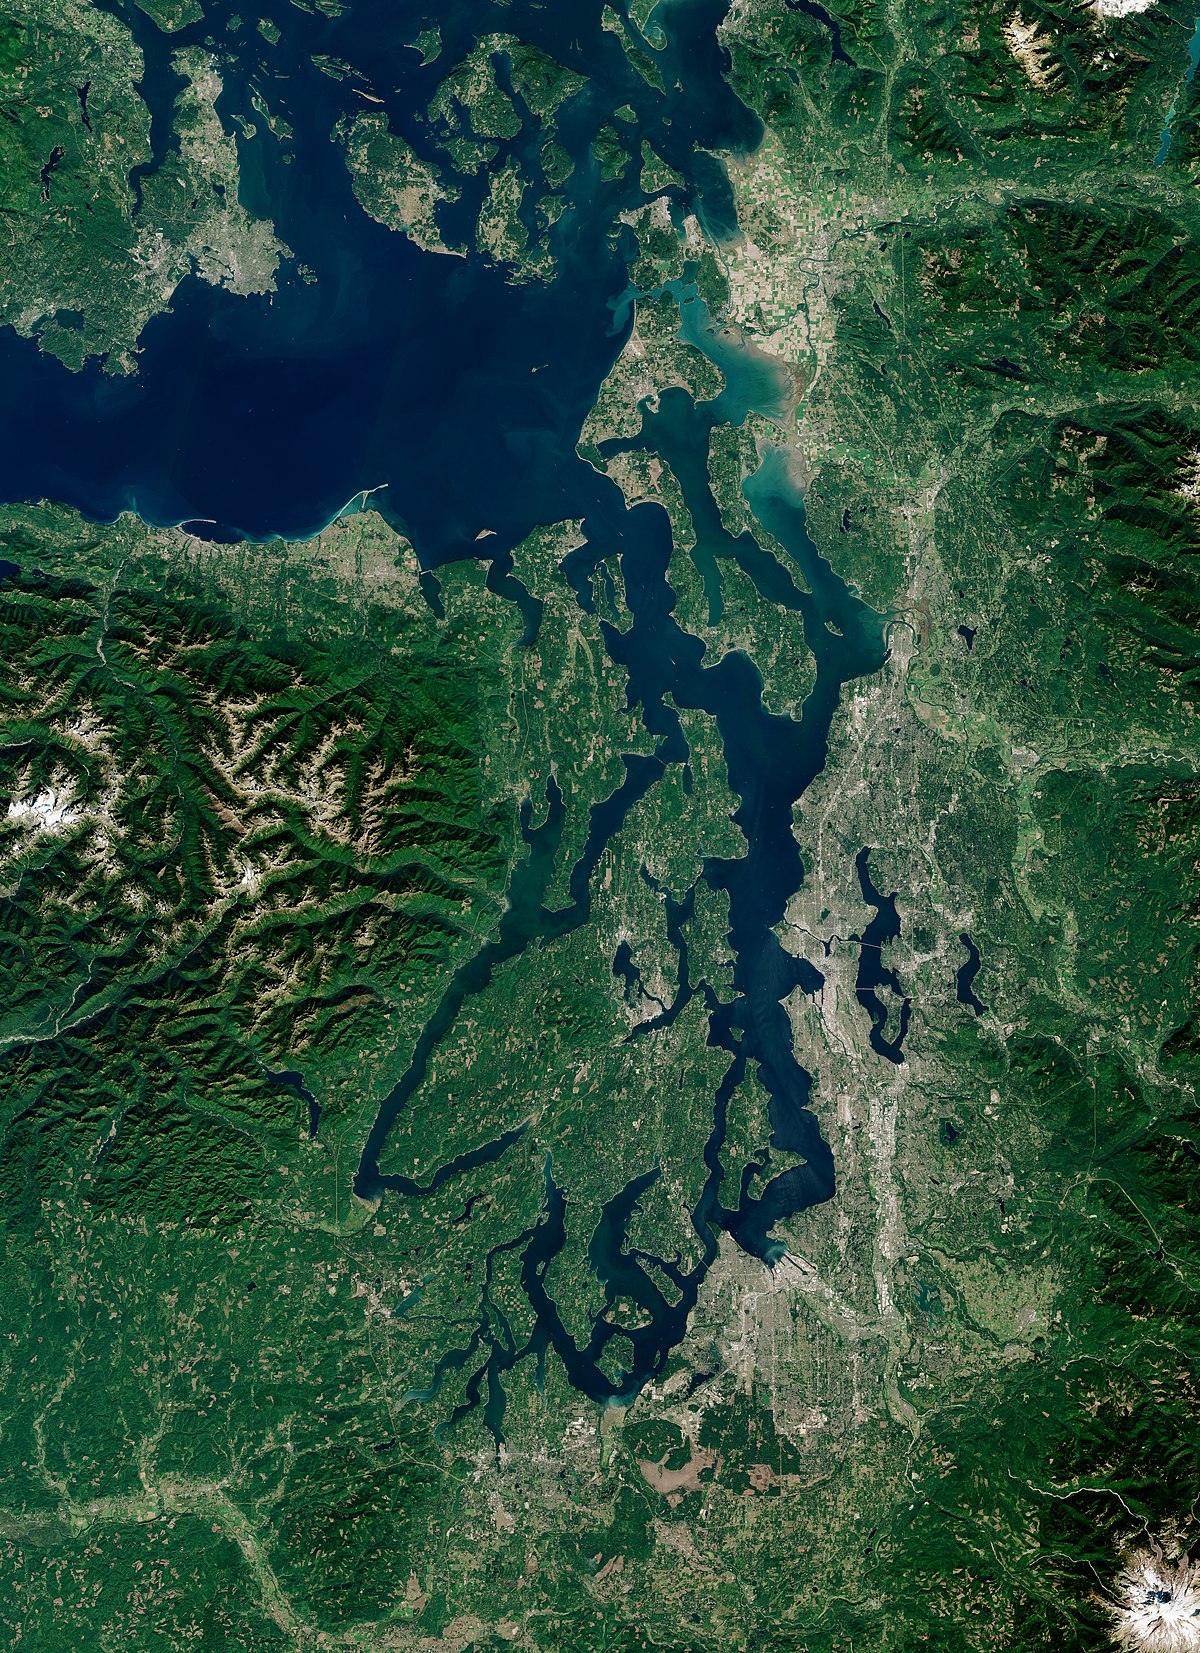 NEWS NOTES ON SUSTAINABLE WATER RESOURCESPuget Soundhttps://en.wikipedia.org/wiki/Puget_SoundPuget Sound (/ˈpjuːdʒɪt/) is a sound of the Pac...